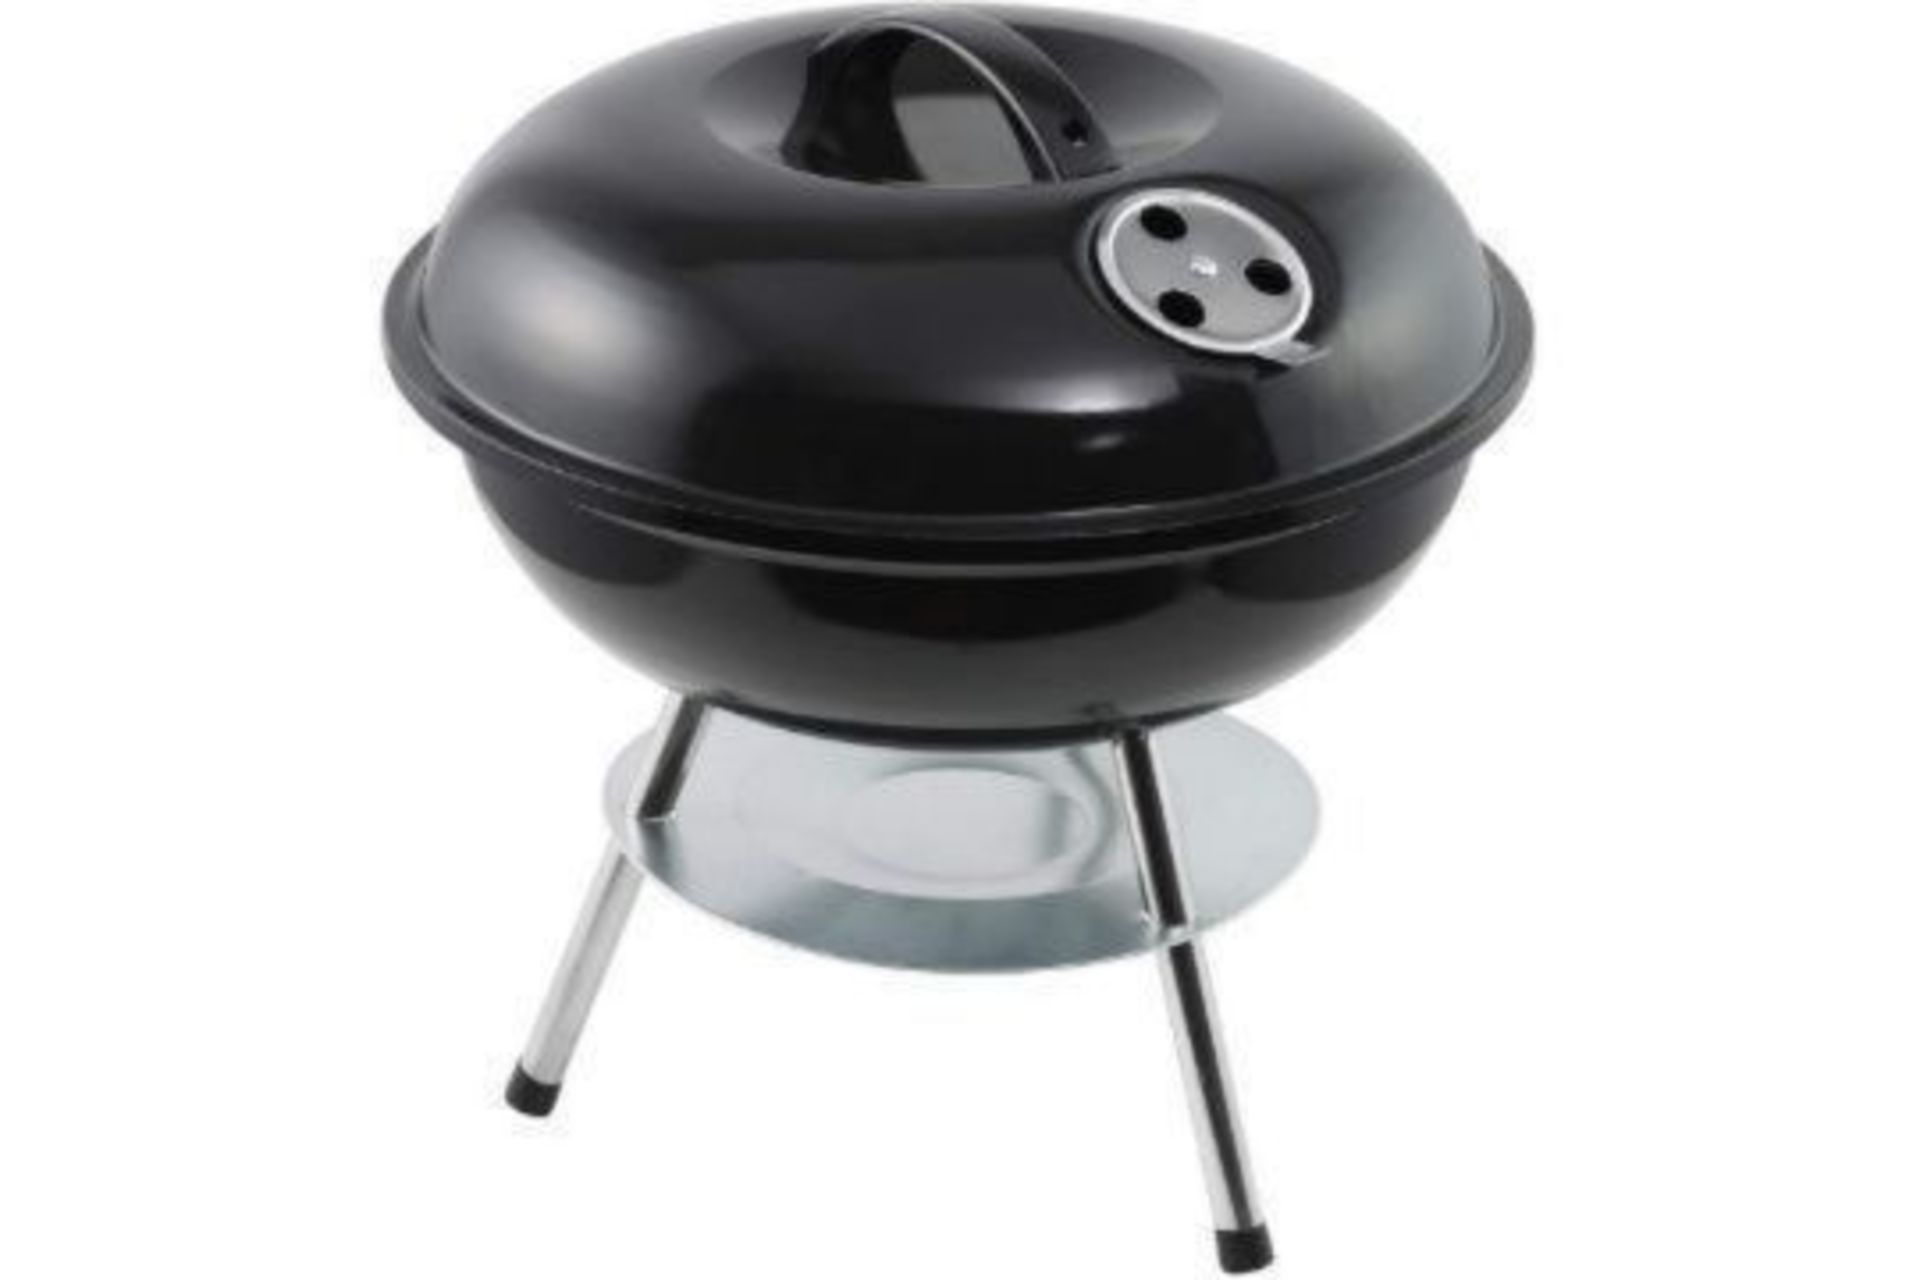 2 X BRAND NEW AIRBIN PORTABLE CHARCOAL 18 INCH ROUND BBQ GRILL WITH WHEELS BLACK RRP £95 EACH